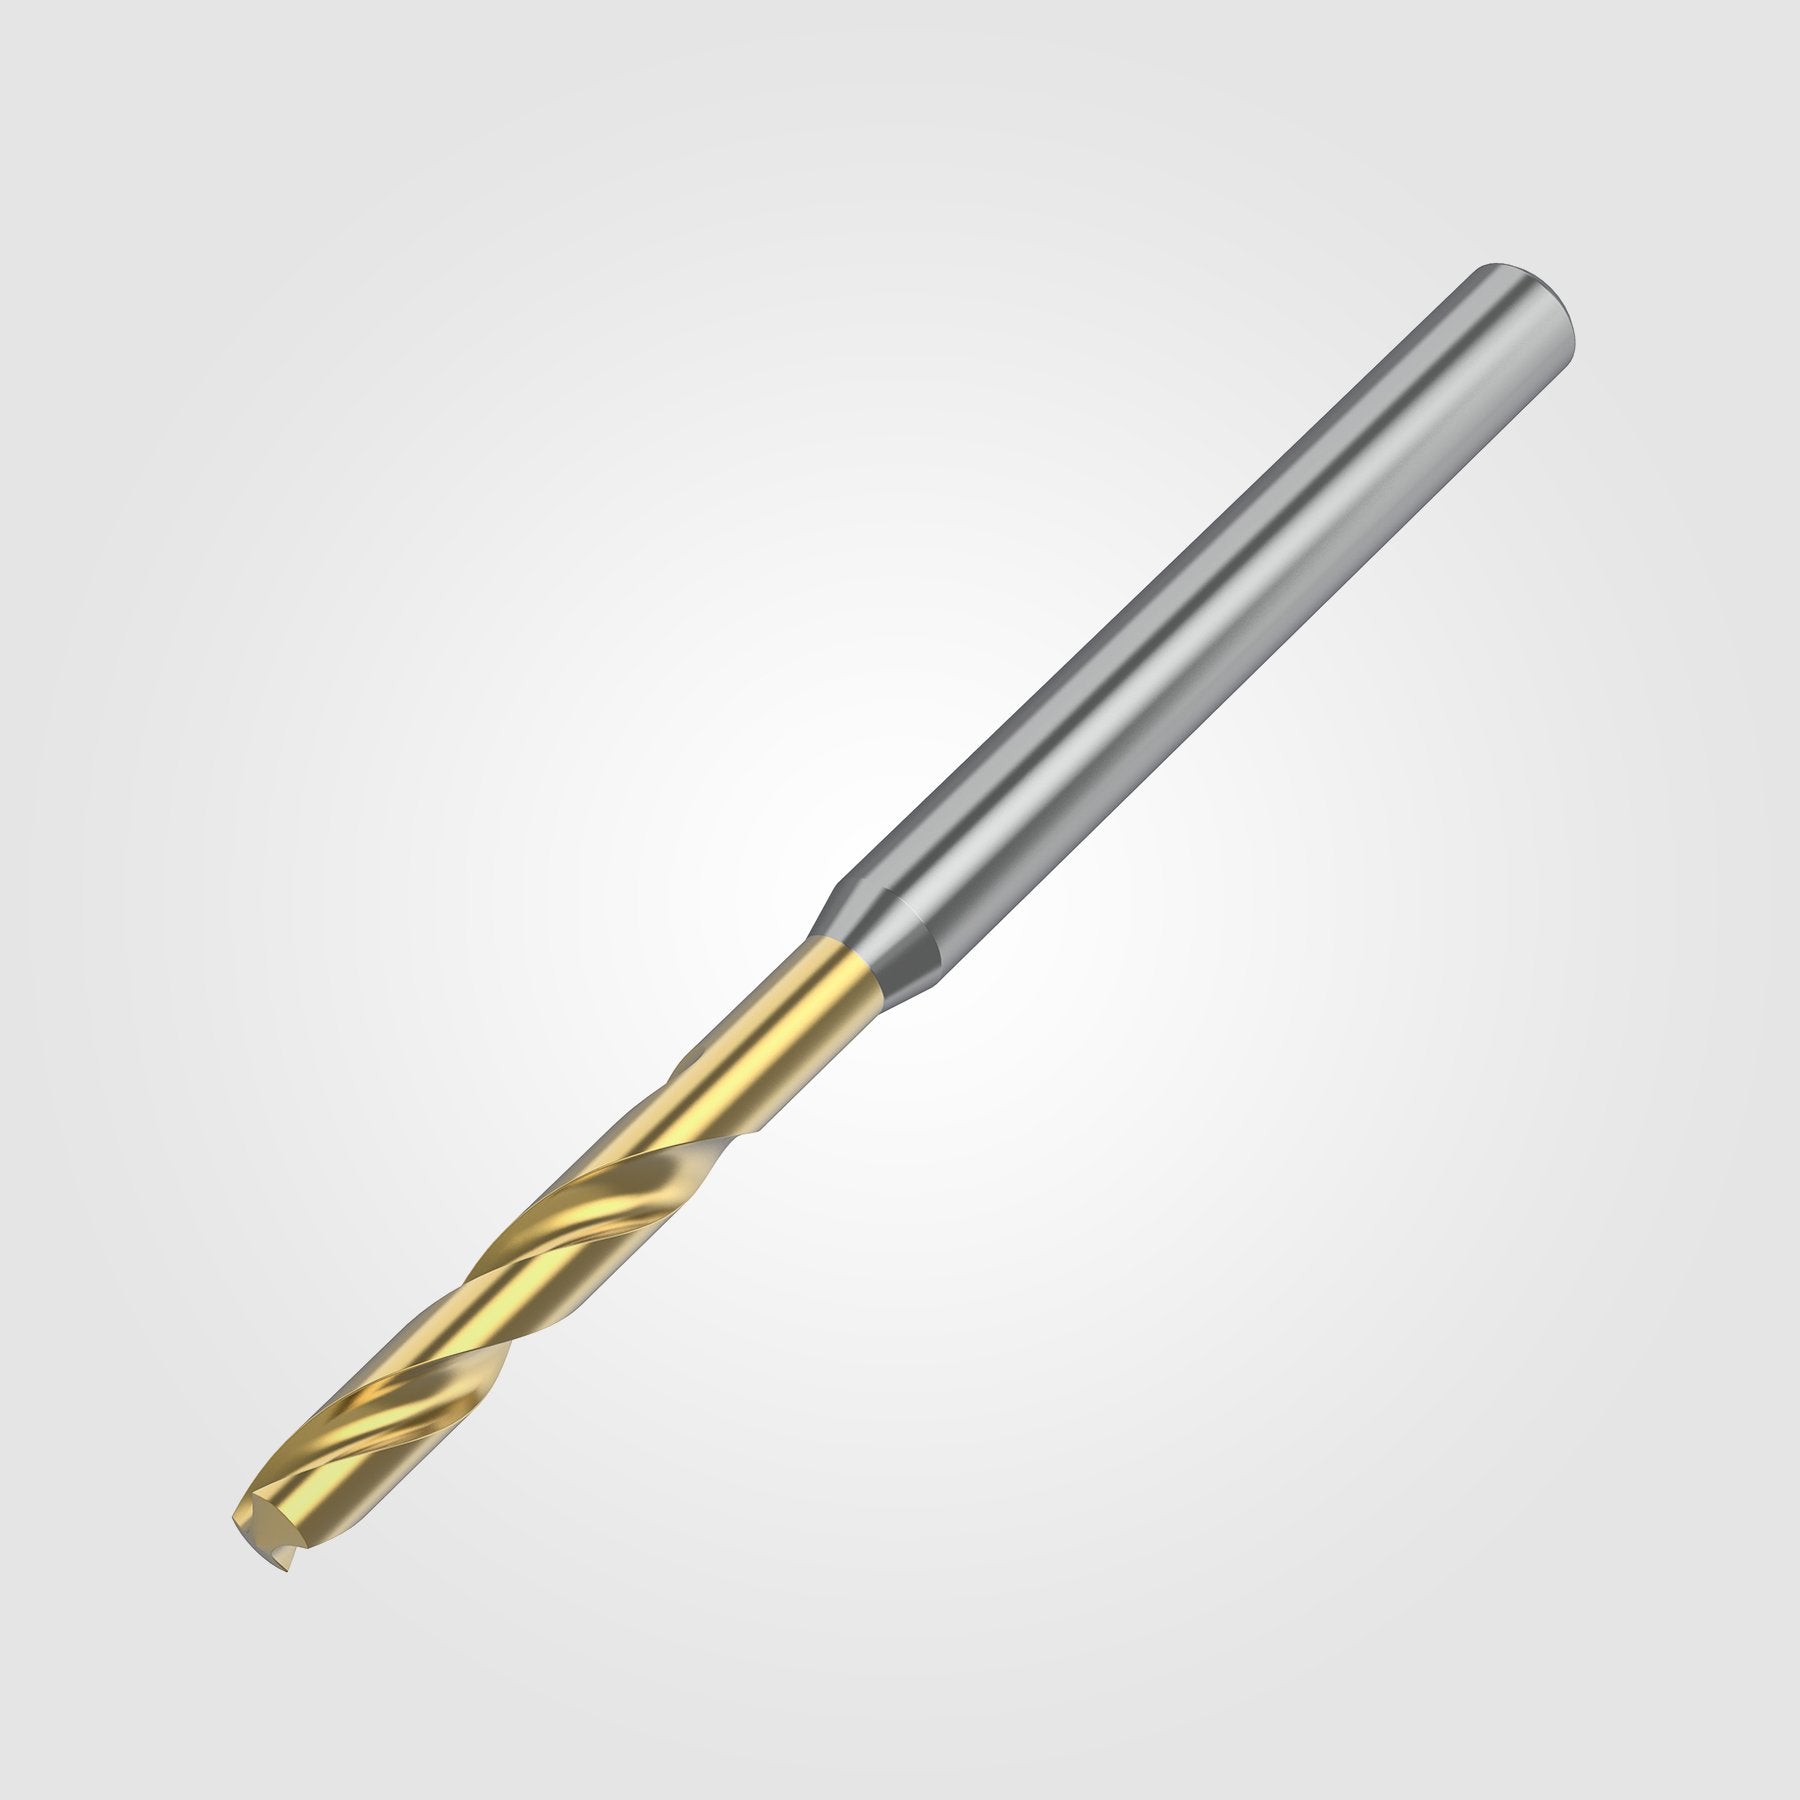 GOdrill (THROUGH COOLANT) | 5.4mm / .2126" / 5xD | SOLID CARBIDE DRILL | 4149216